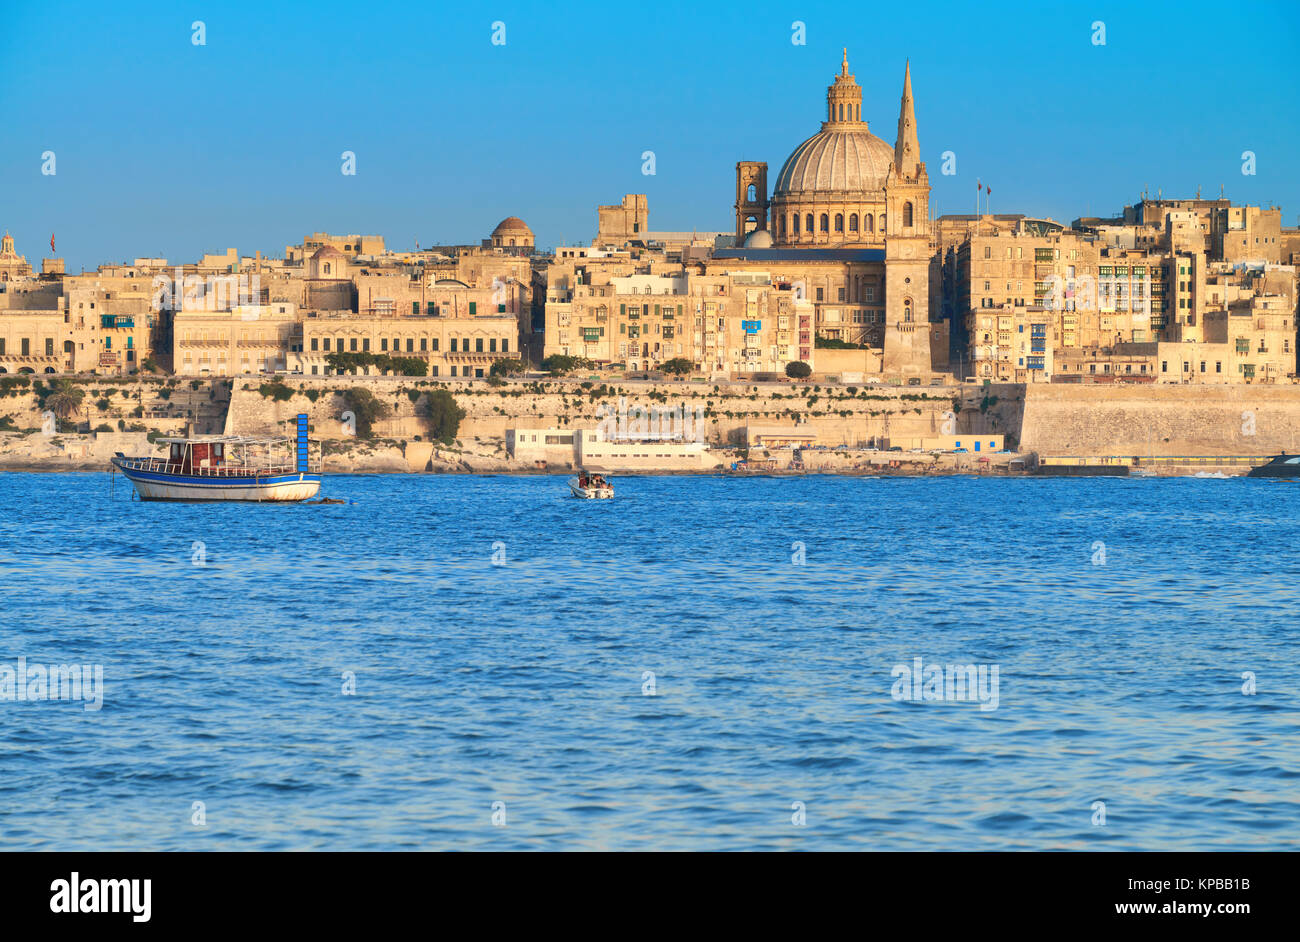 Malta, Valetta, cityscape. Touristic boat, ancient fortifications of La Valetta, old houses and St. Paul's Cathedral Stock Photo